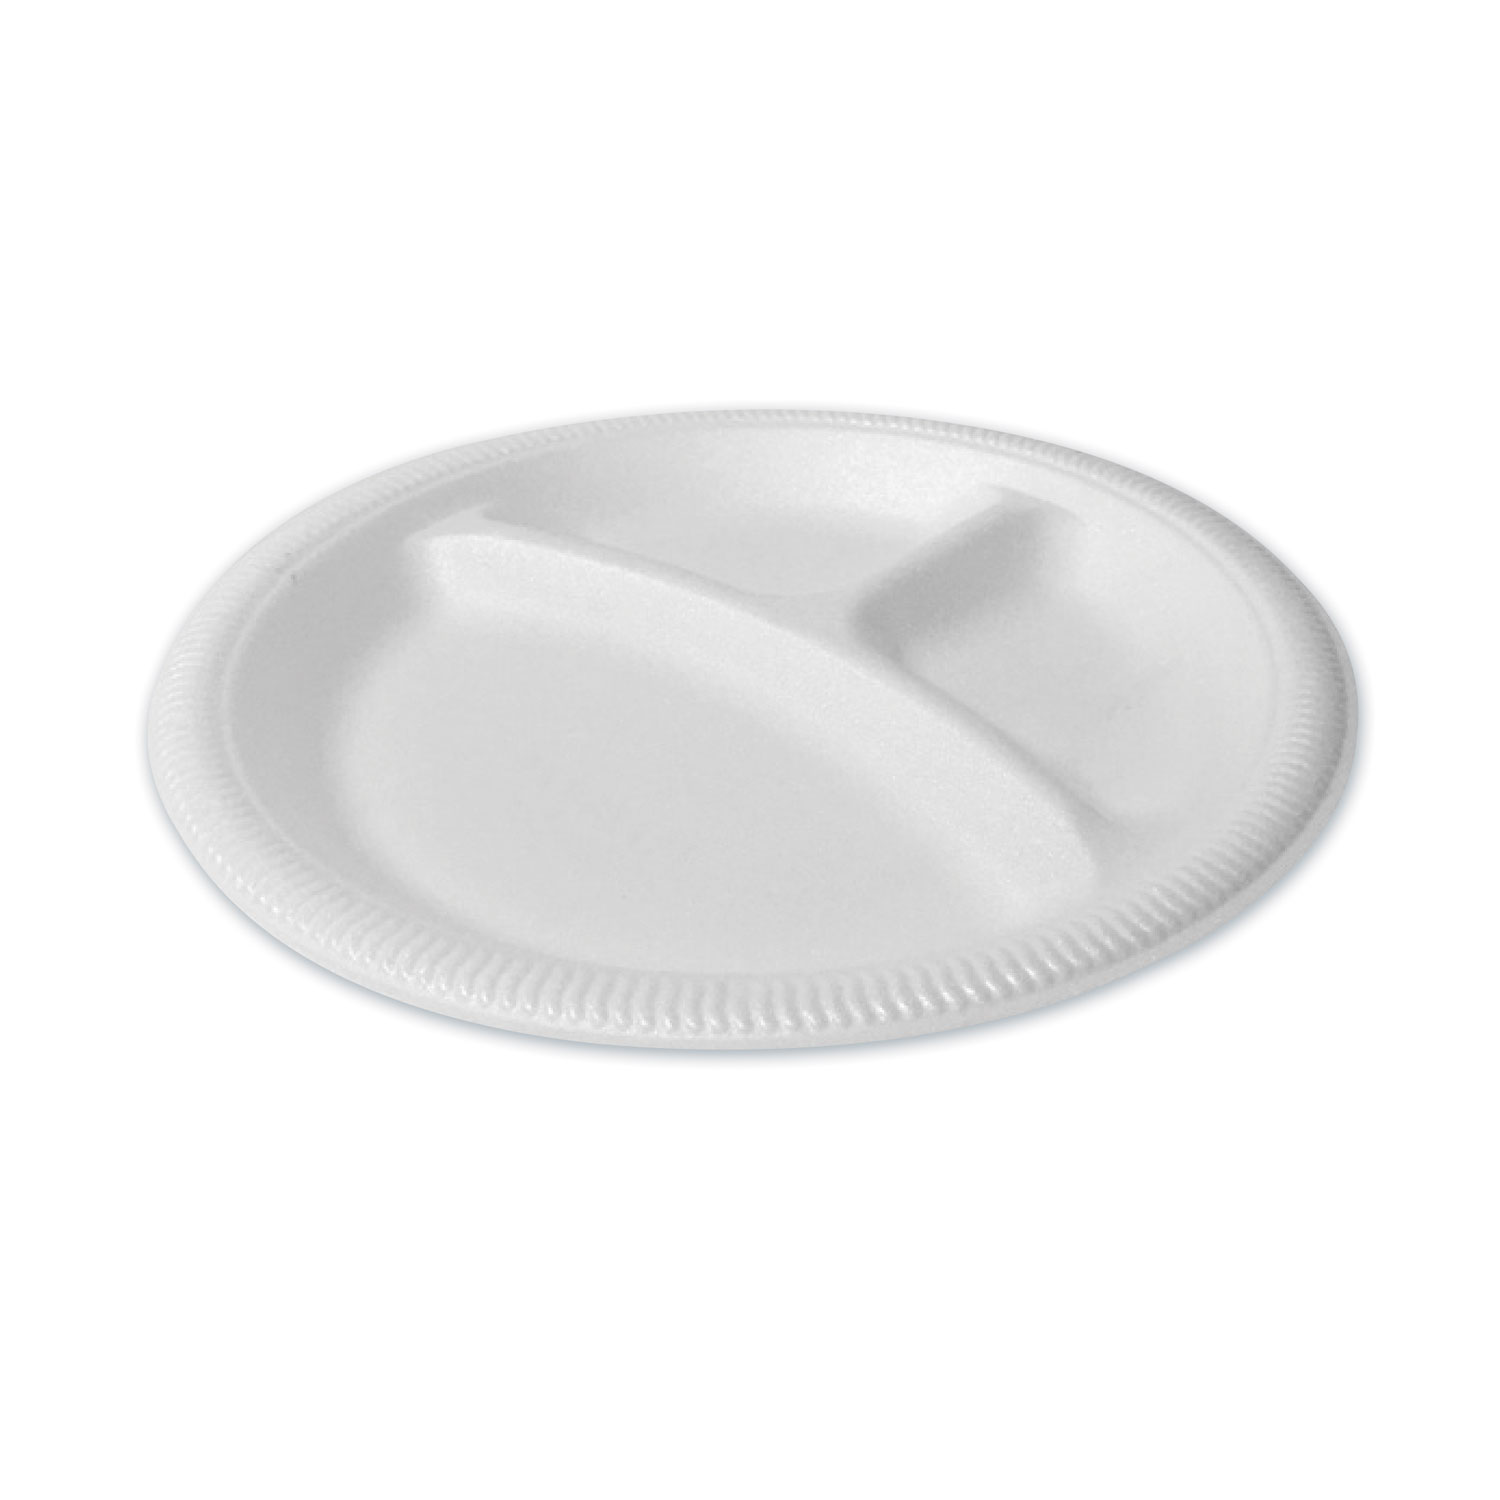 Foam Dinnerware, Plate, 3-Compartment, 9 dia, Poly Bag, White, 125/Sleeve,  4 Sleeves/Bag, 1 Bag/Pack